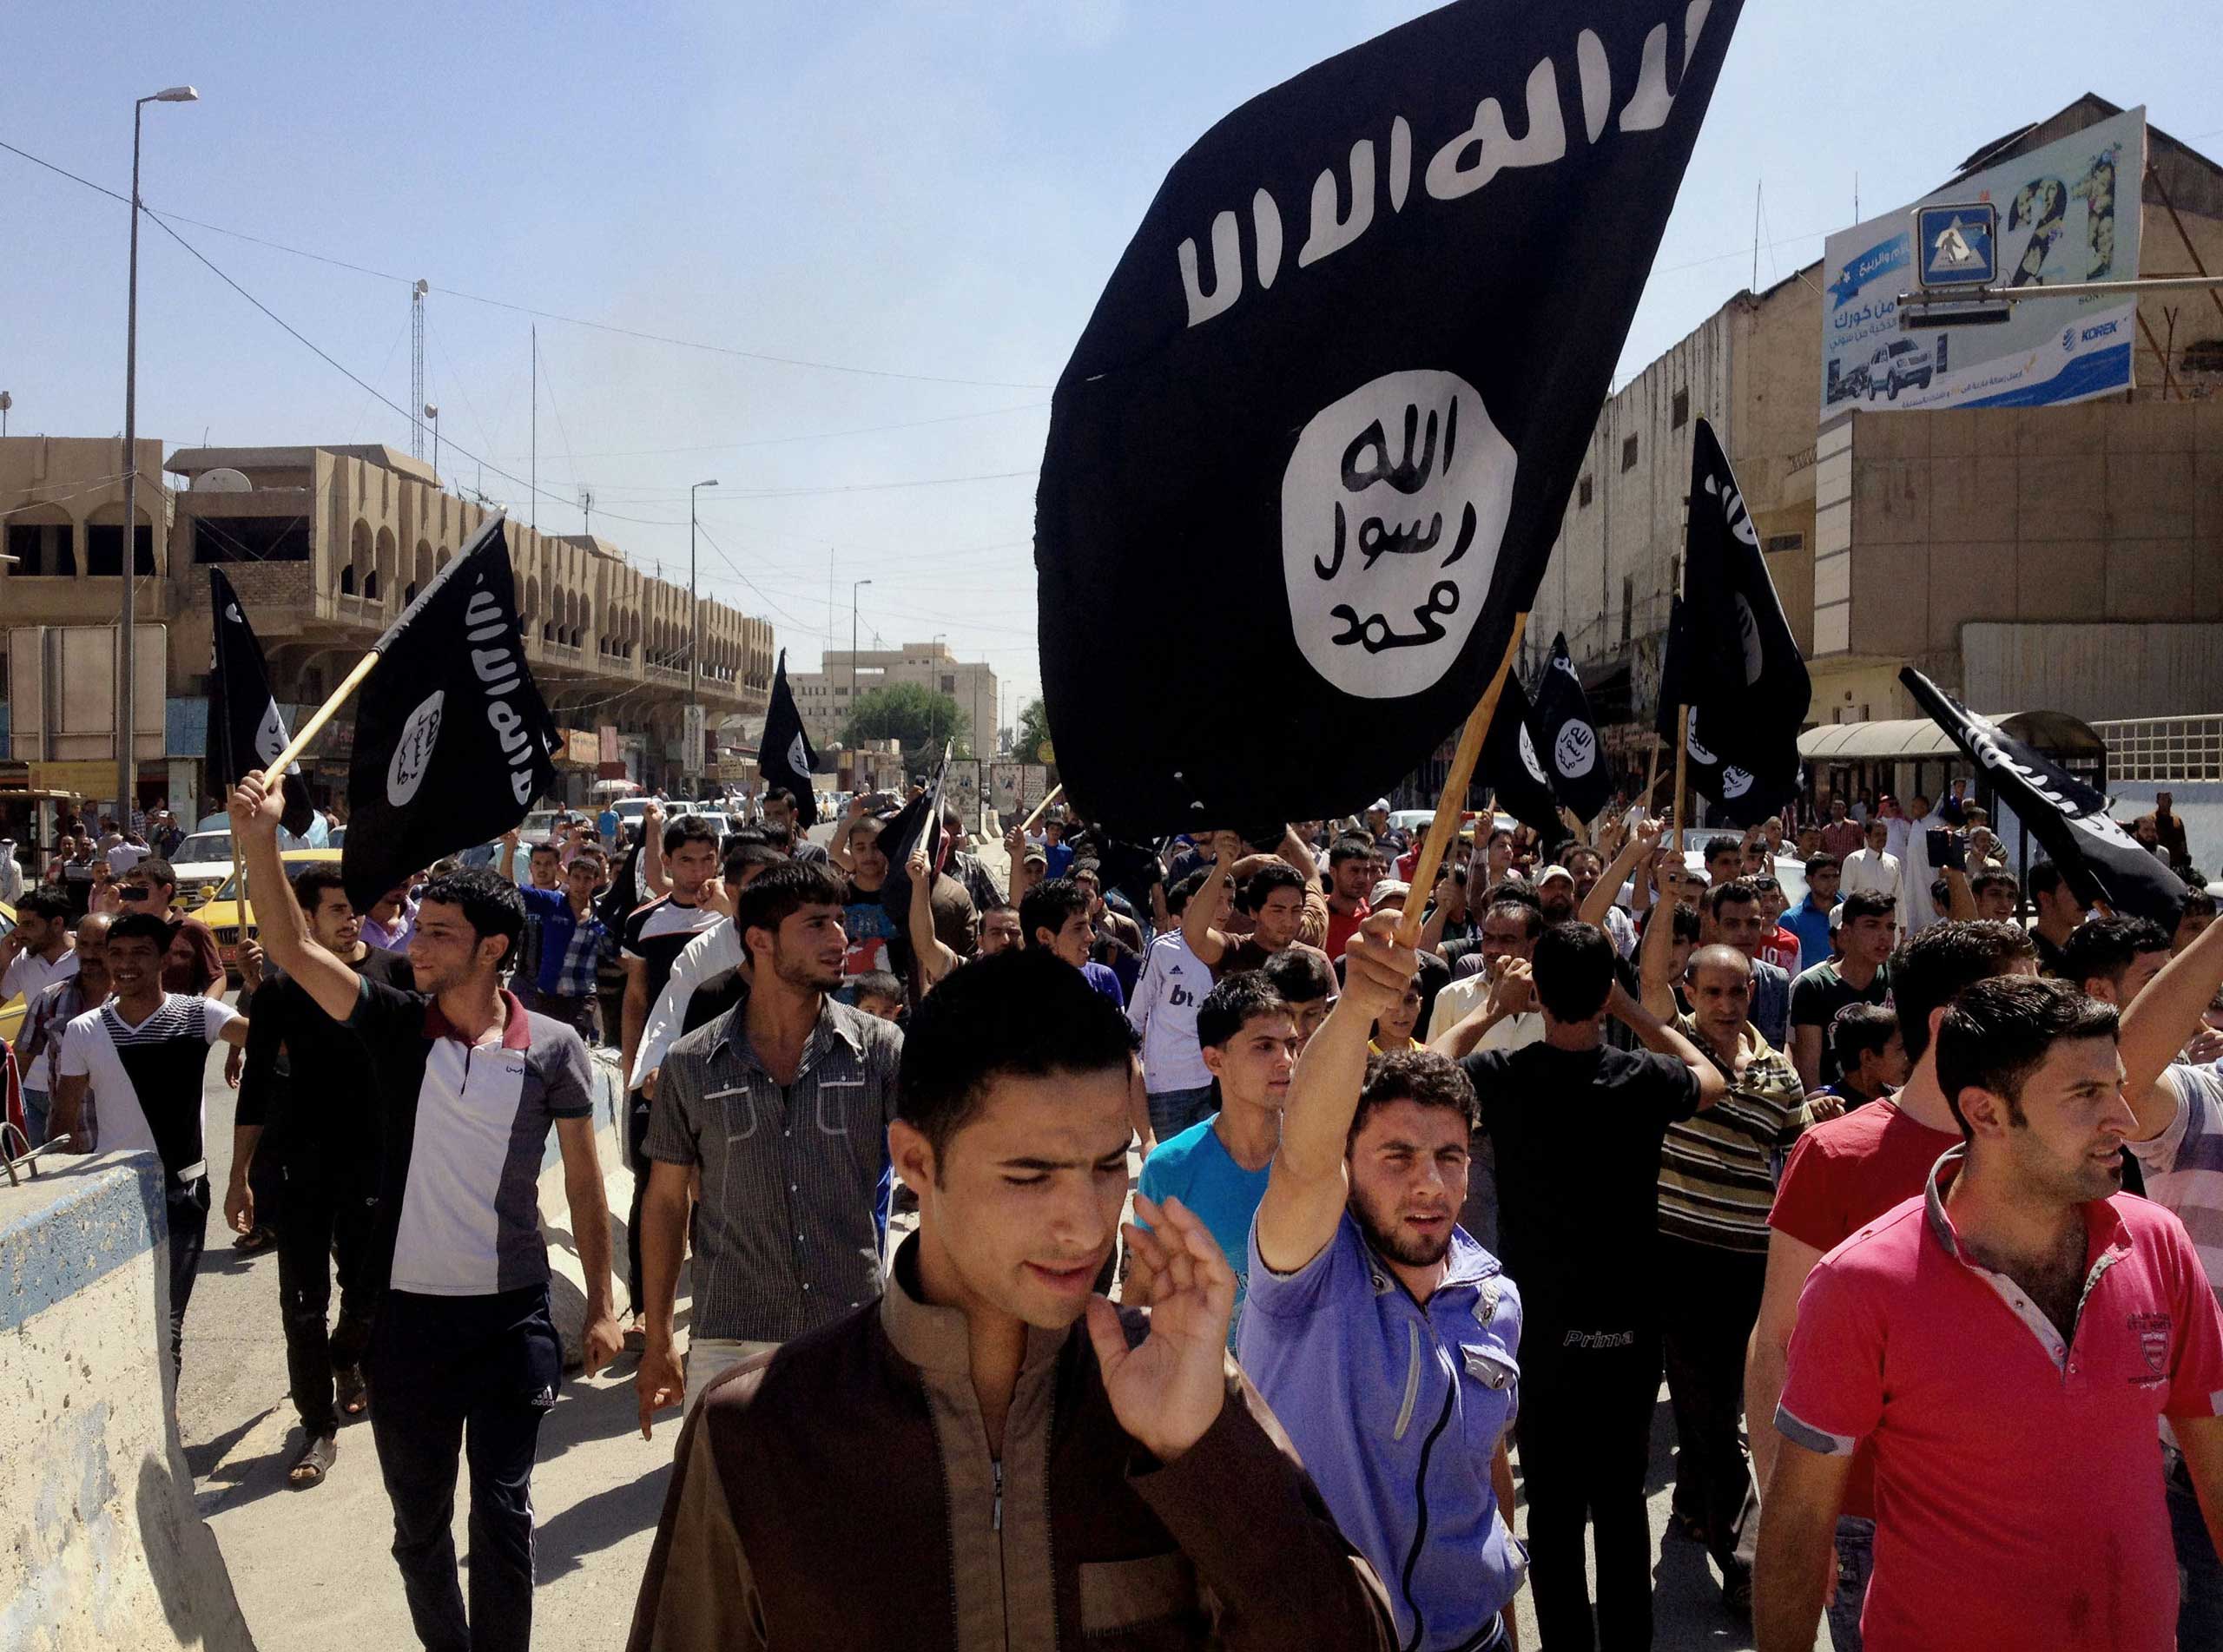 Demonstrators chant ISIS slogans as they wave the group's flags in front of the provincial government headquarters in Mosul, June 2014. (AP)